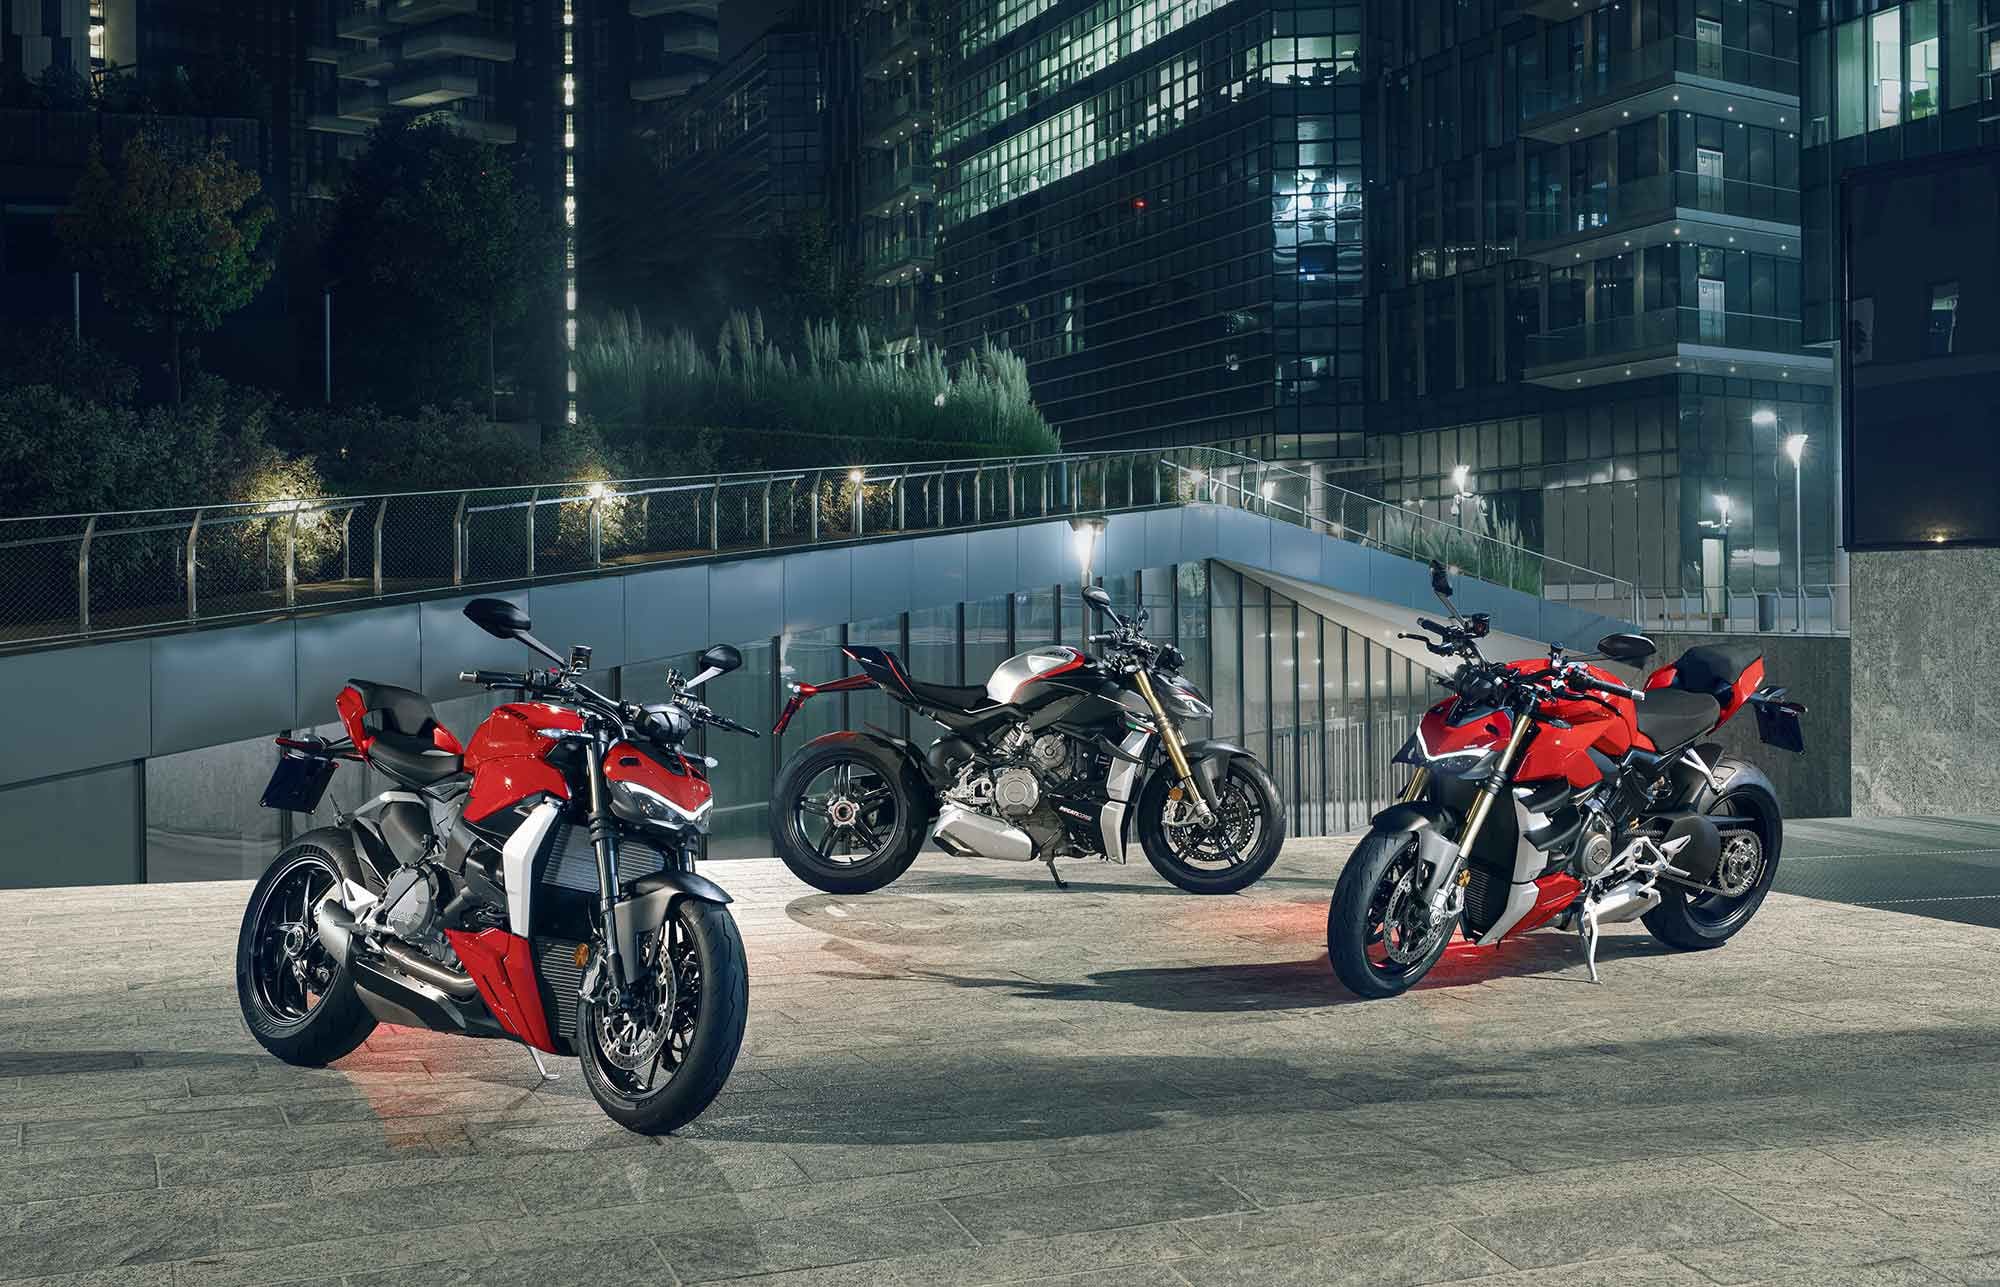 Family portrait: Ducati’s Streetfighter line is a delicate balancing act between the racetrack-bred superbikes and supersports, and the Diavel cruisers. The Streetfighters get both the style and performance right.